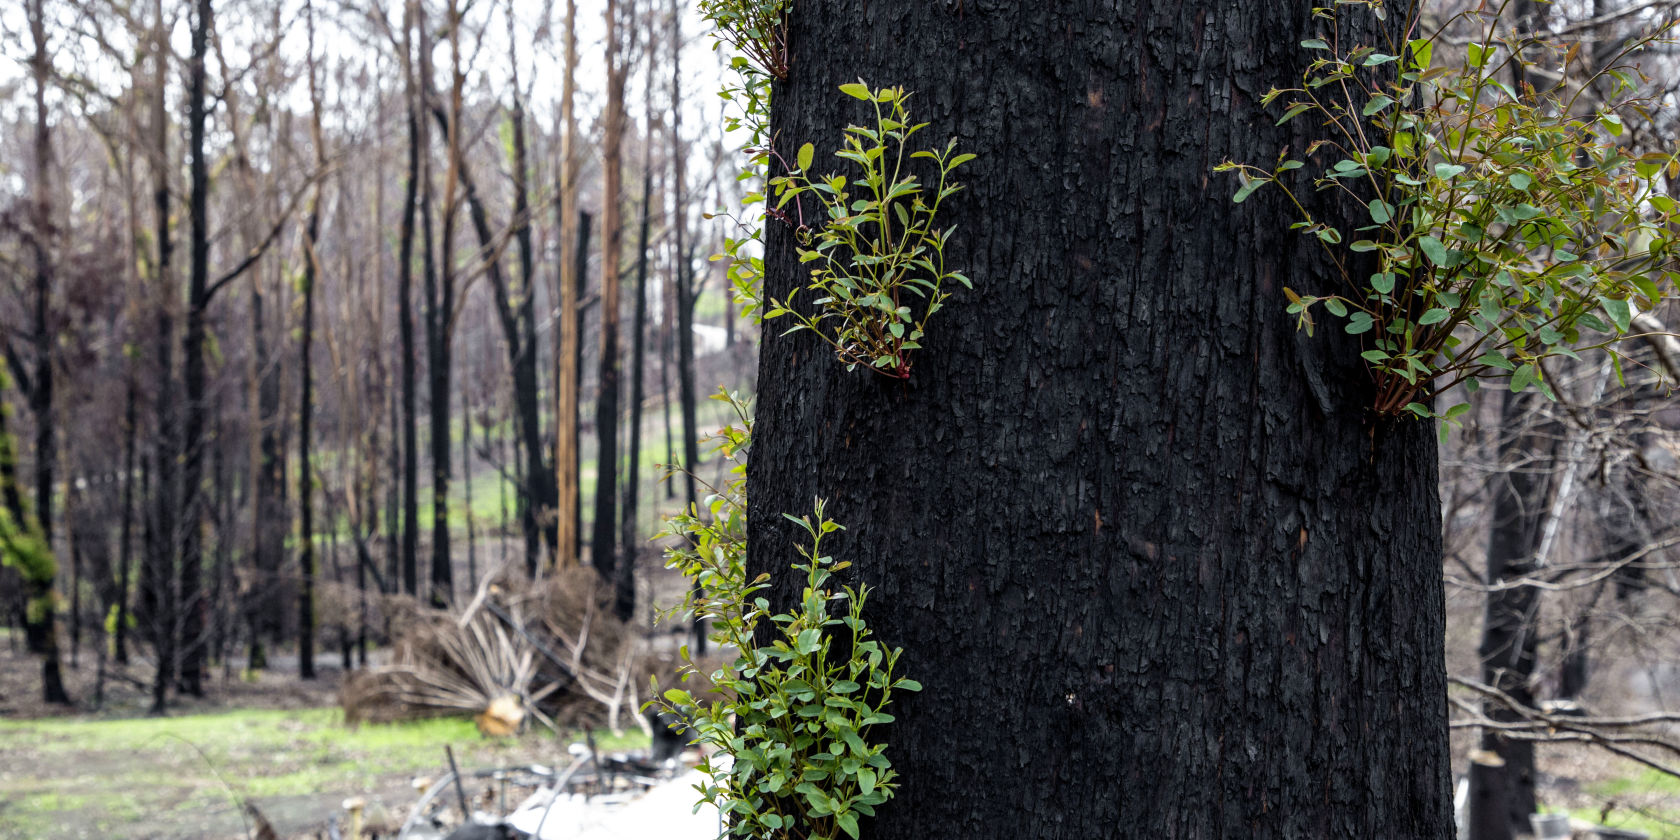 Digital ramp-up to keep all insurance claims moving during COVID-19: Bushfire recovery remains priority